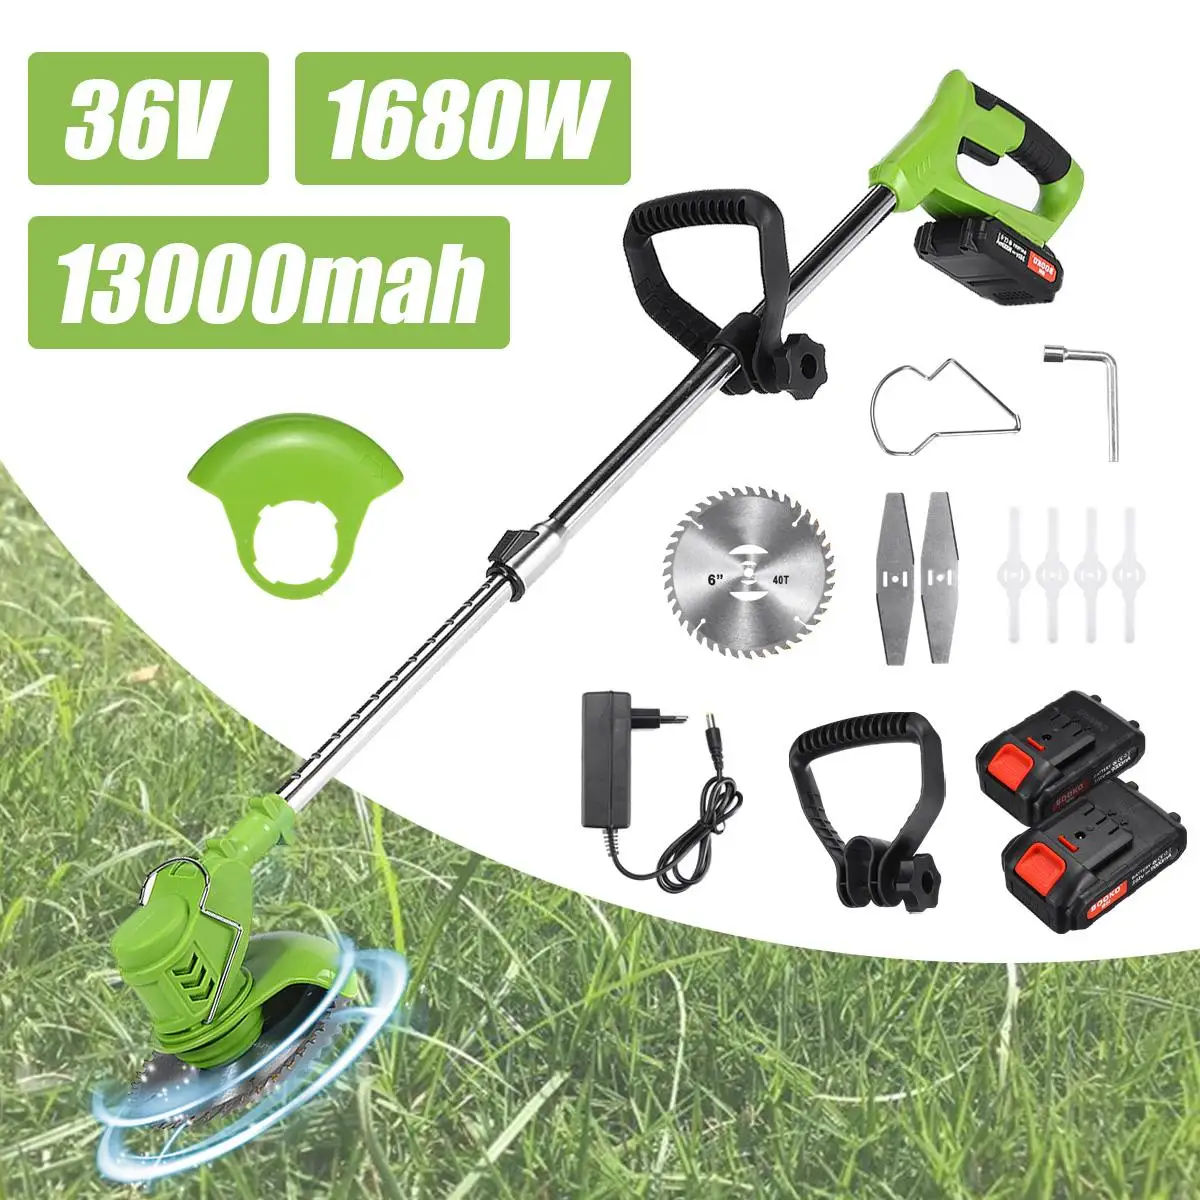 18800 RPM Electric Lawn Mower Cordless Grass Hedge Trimmer Adjustable Portable Handheld Mowing Machine Garden Tools Home